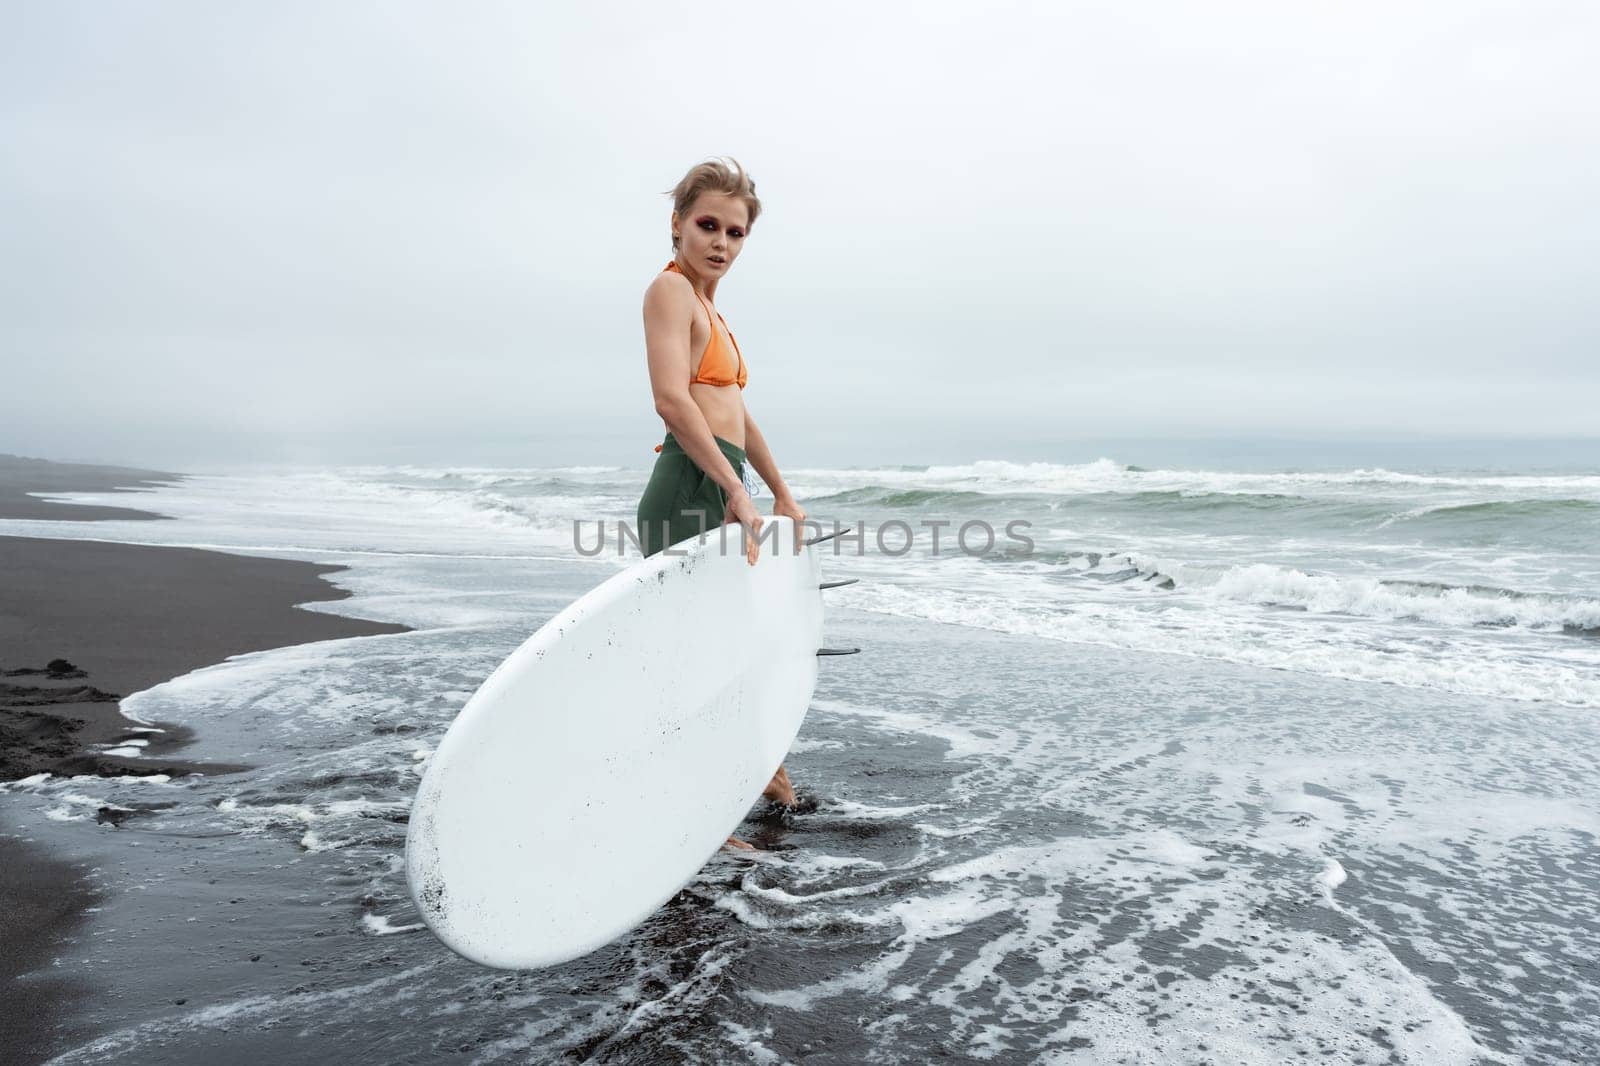 Woman surfer walking in ankle deep water of sea waves on beach carrying white surfboard against background of ocean during summer beach holiday. Sportswoman looking at camera. Full length, wide shot